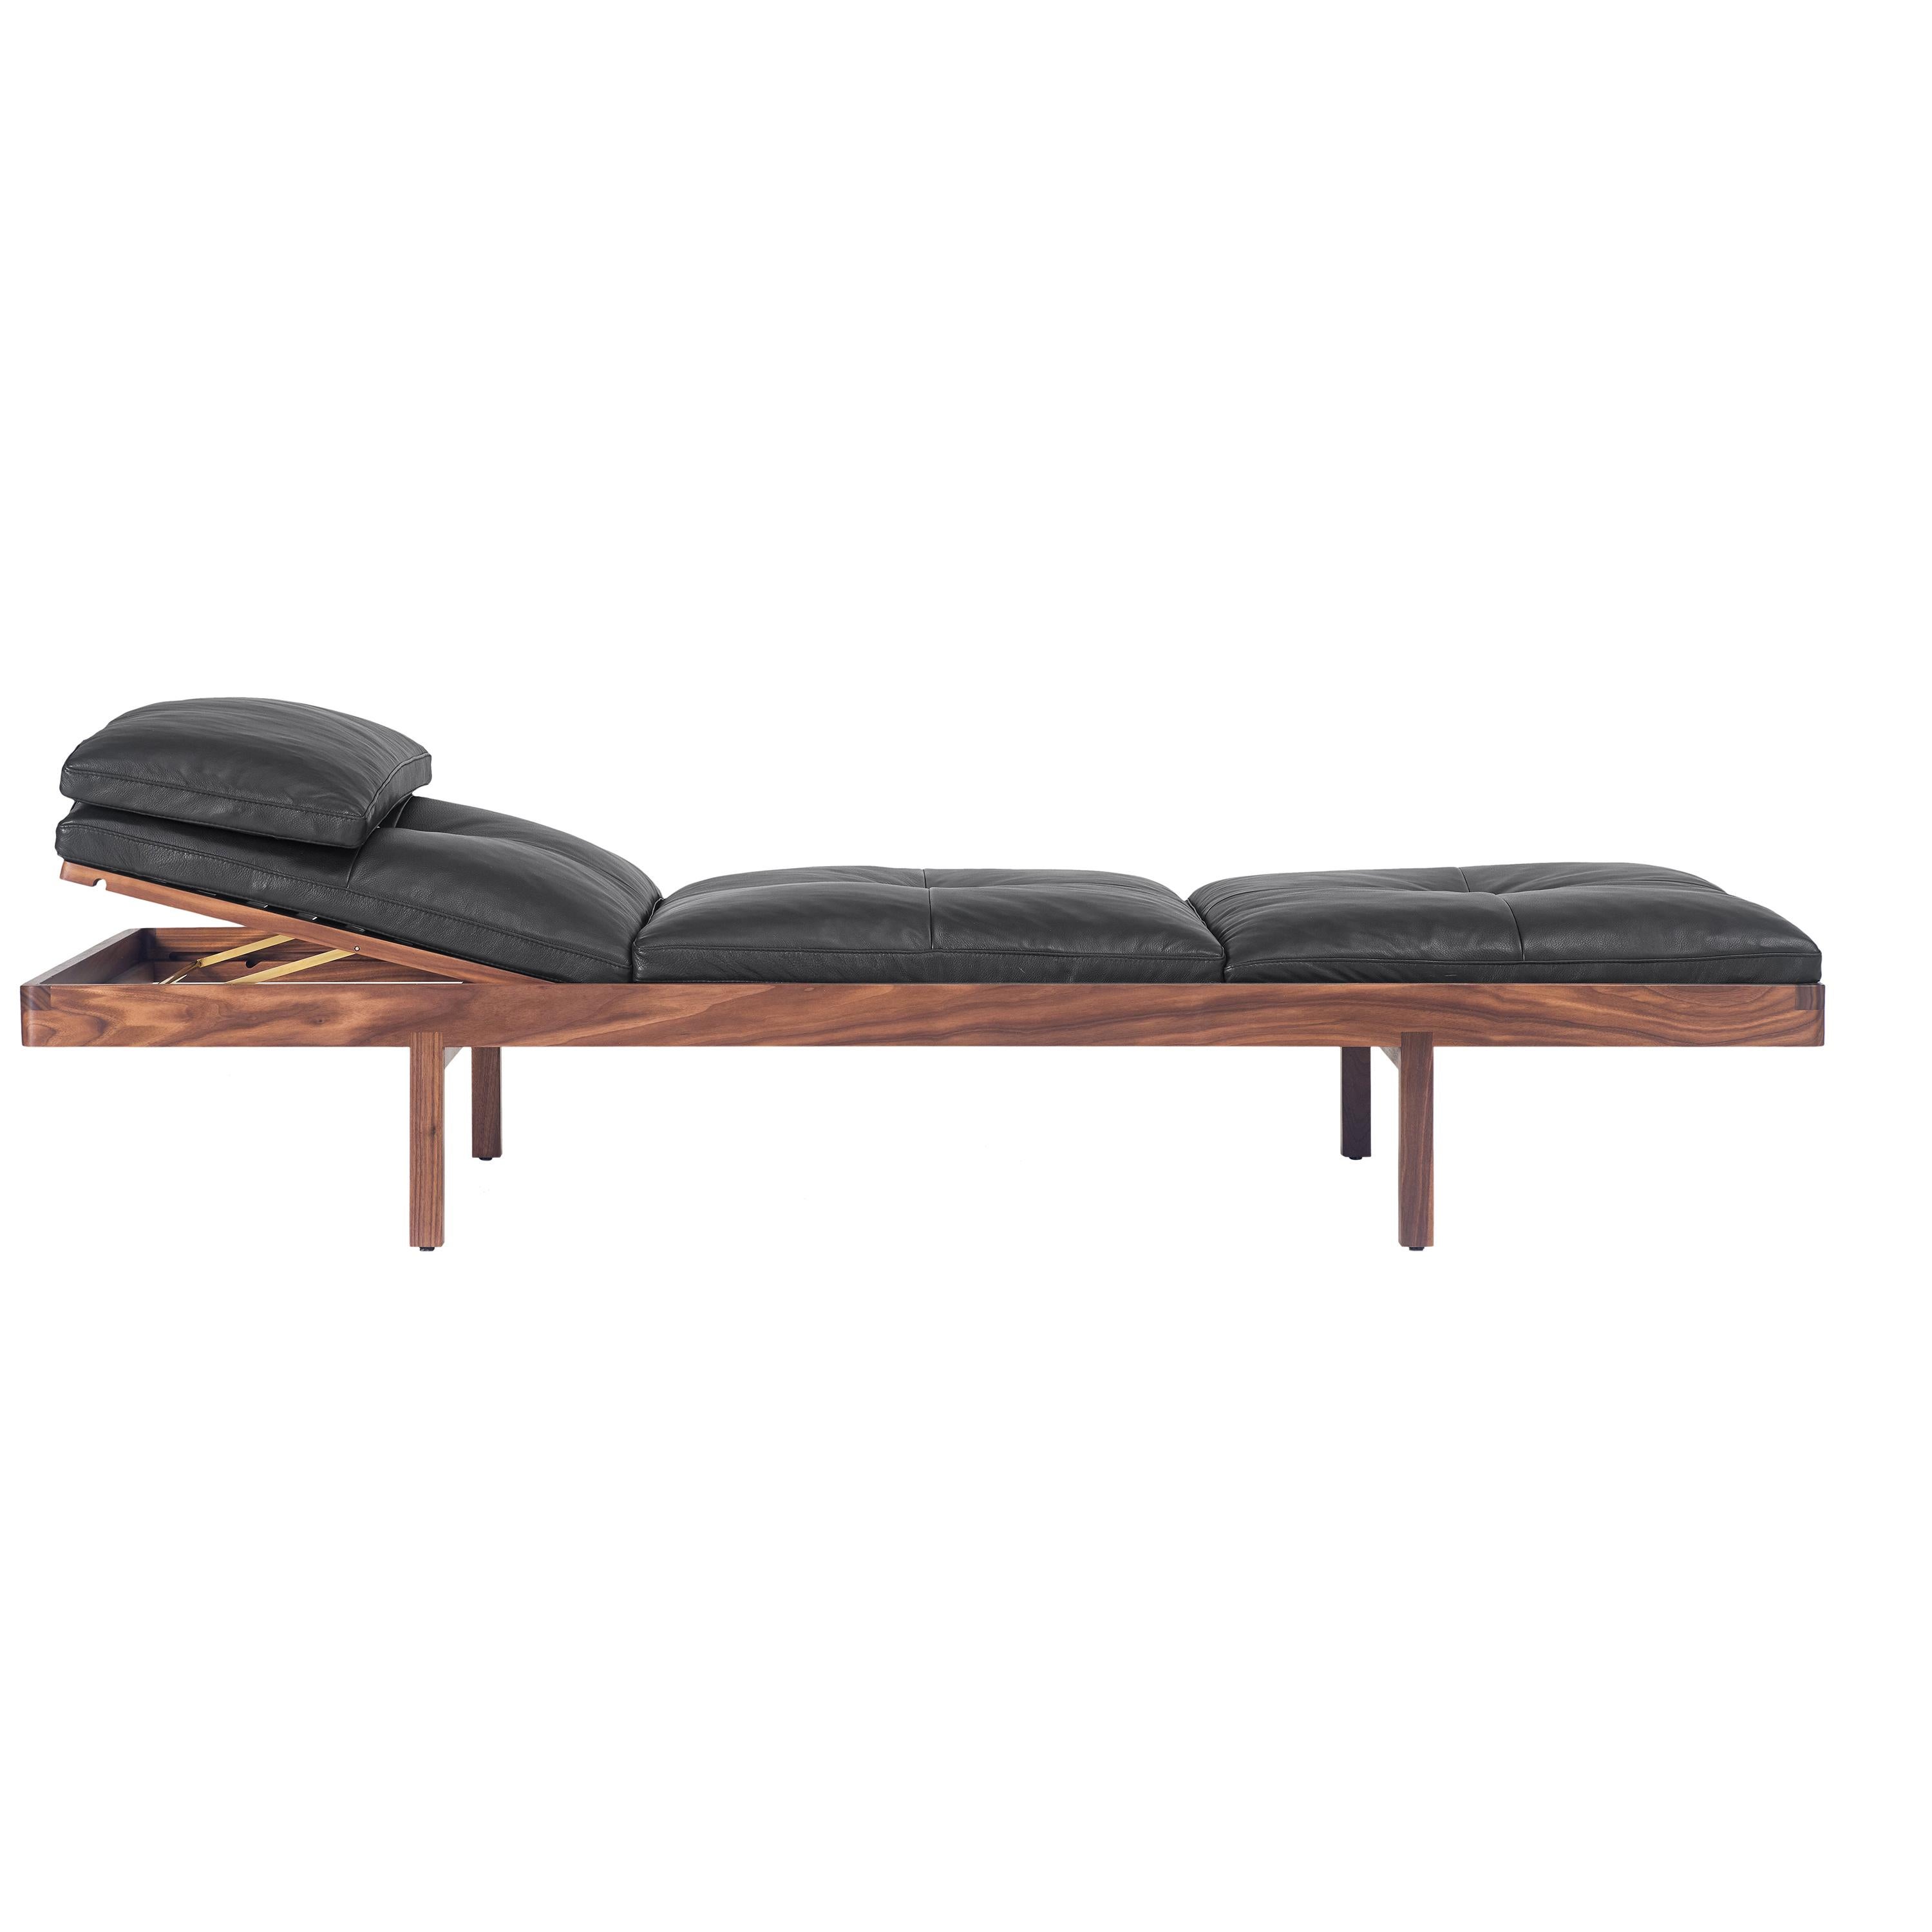 Daybed in Walnut and Leather Designed by Craig Bassam